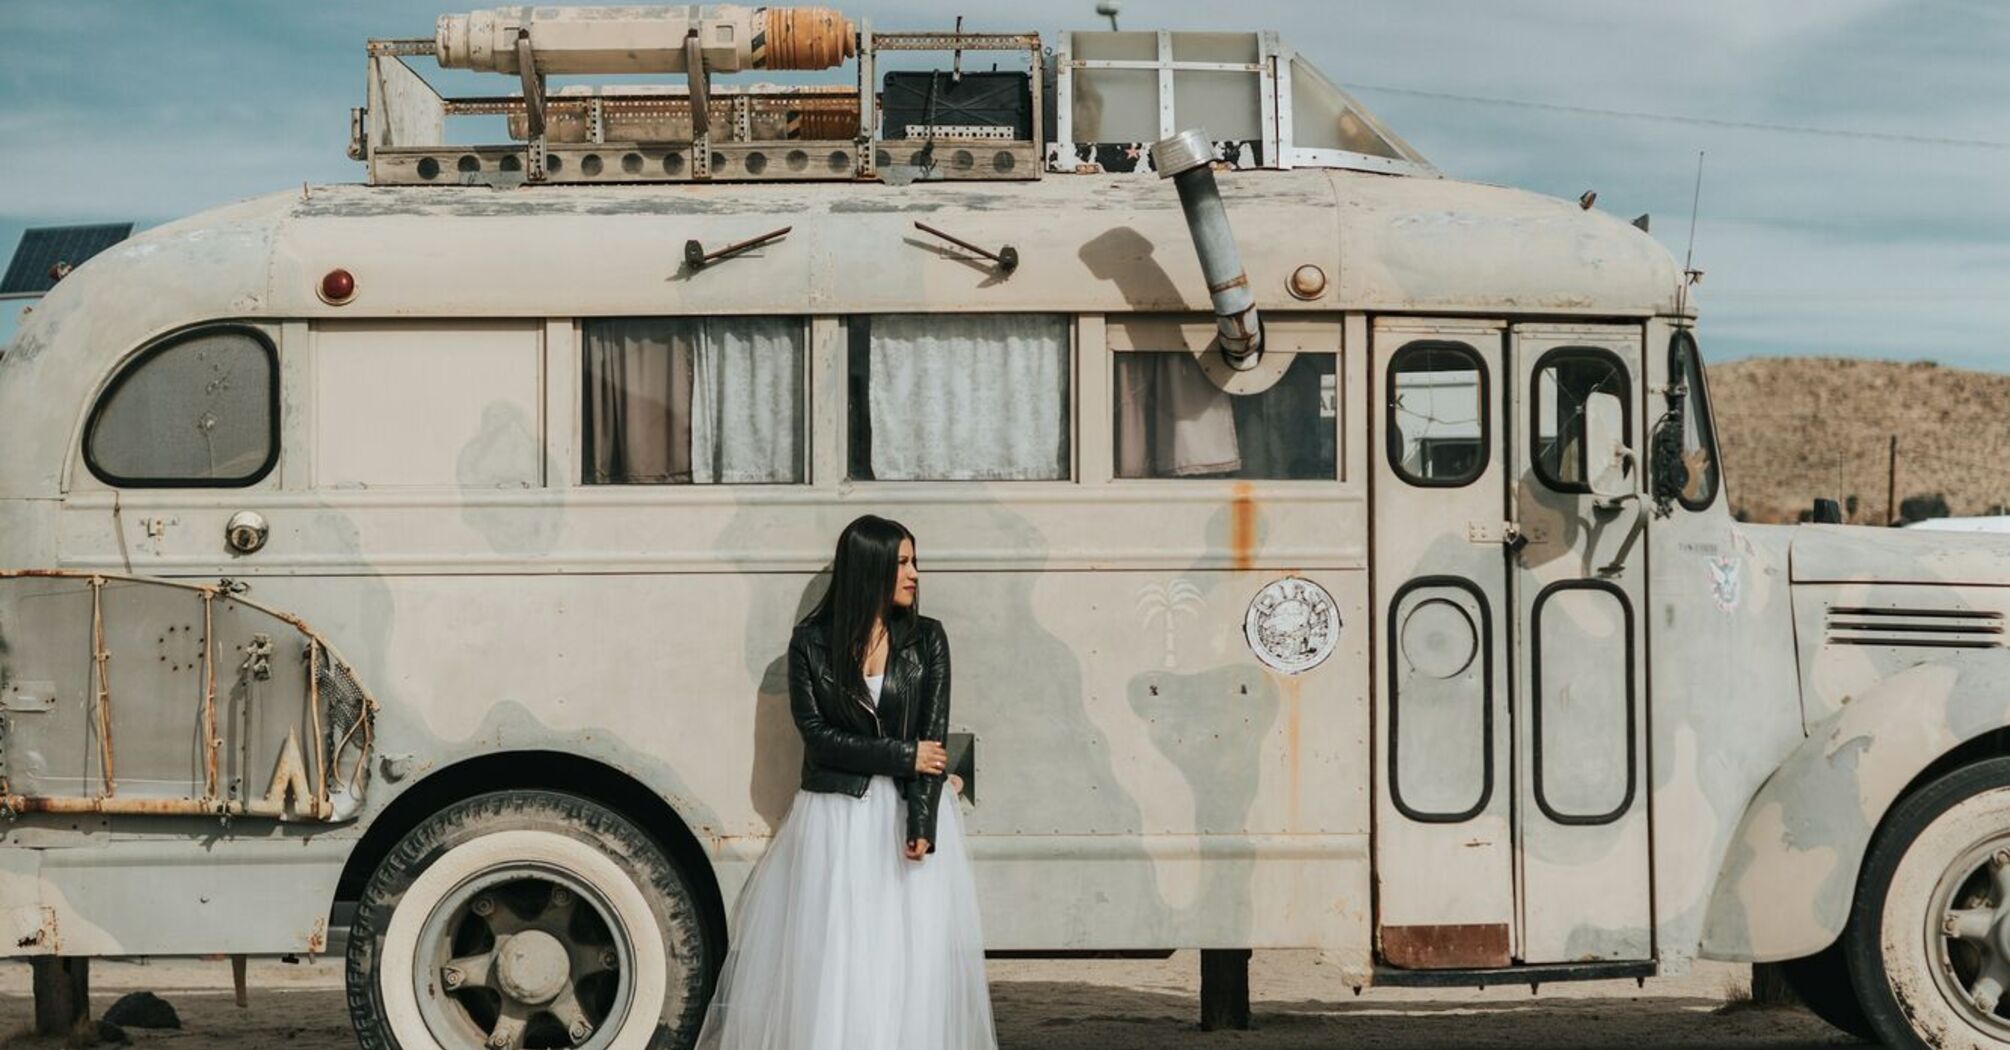 Woman in wedding dress standing next to white rv